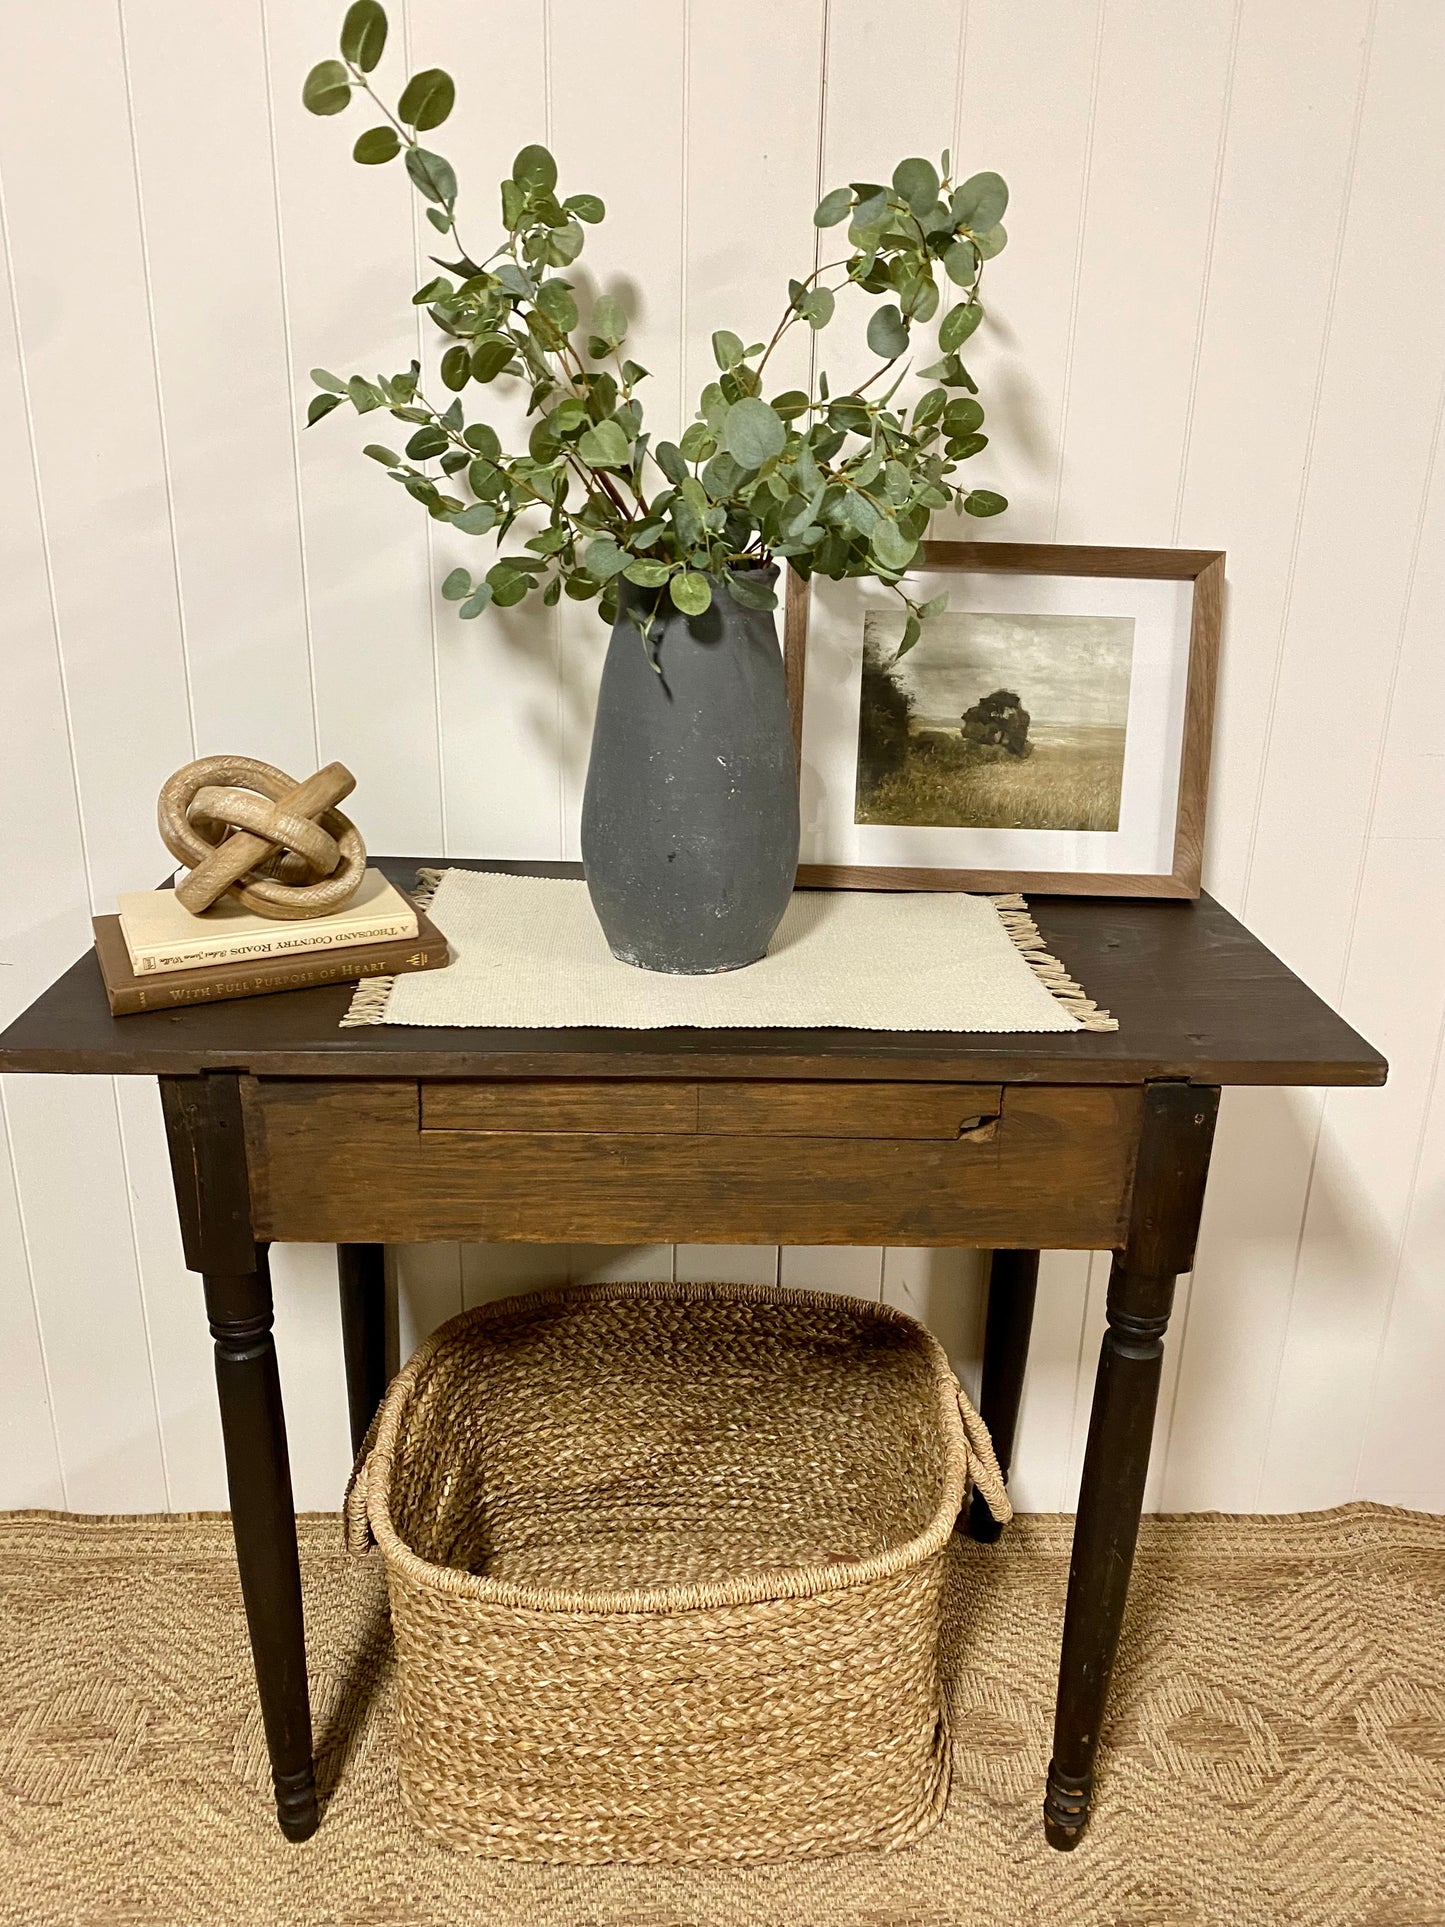 Vintage Small Brown Farm Table - perfect for small entry console